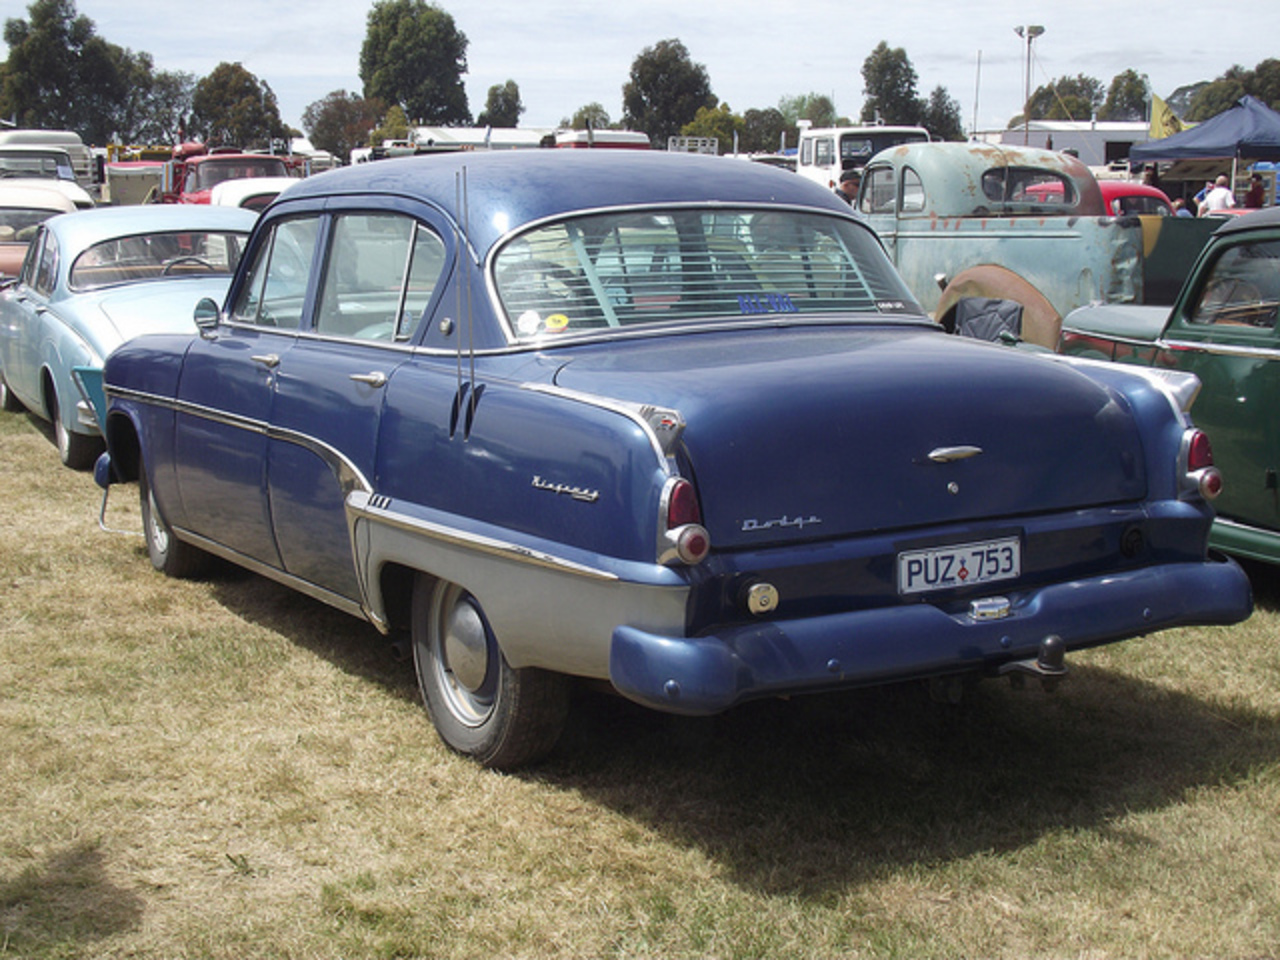 Nice looking 1954 Dodge Kingsway sedan that was at the car show at the steam